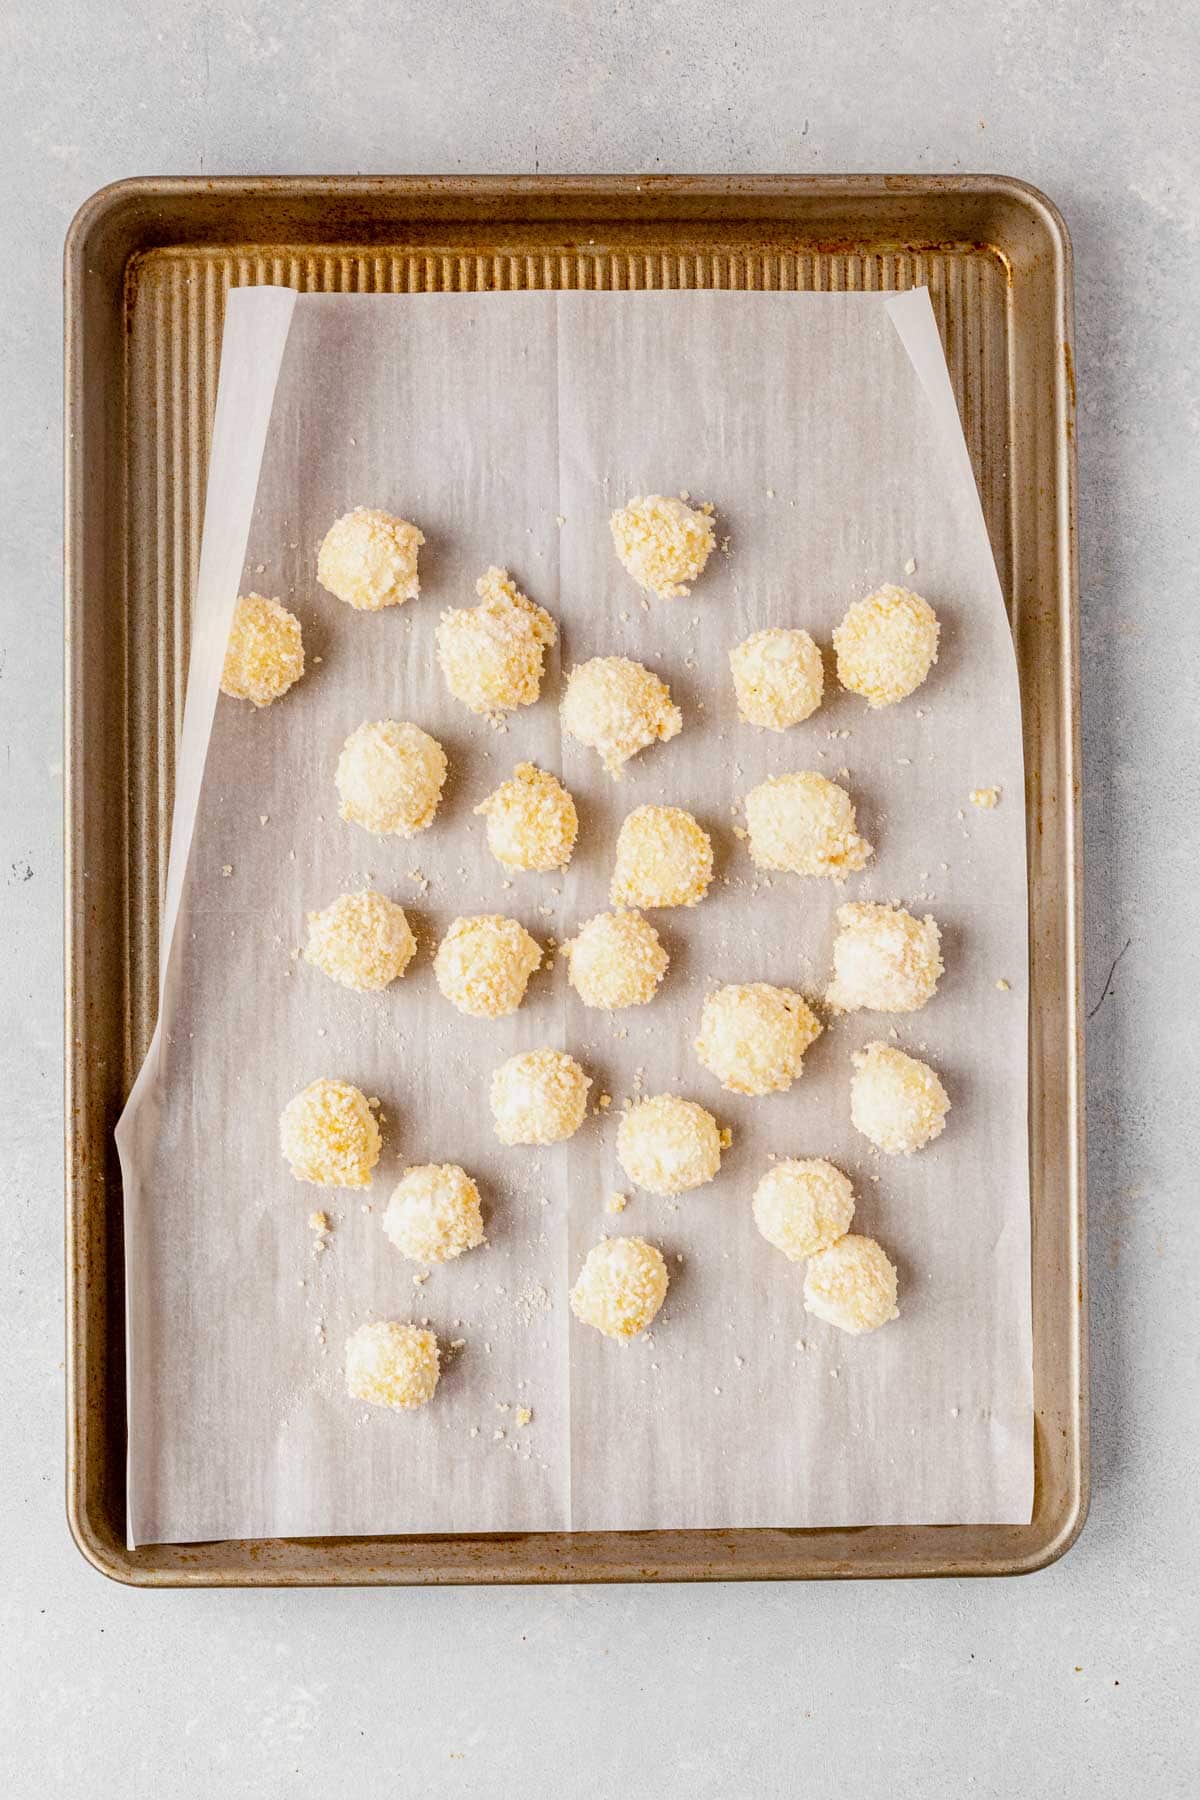 breaded goat cheese balls on a baking sheet before frying